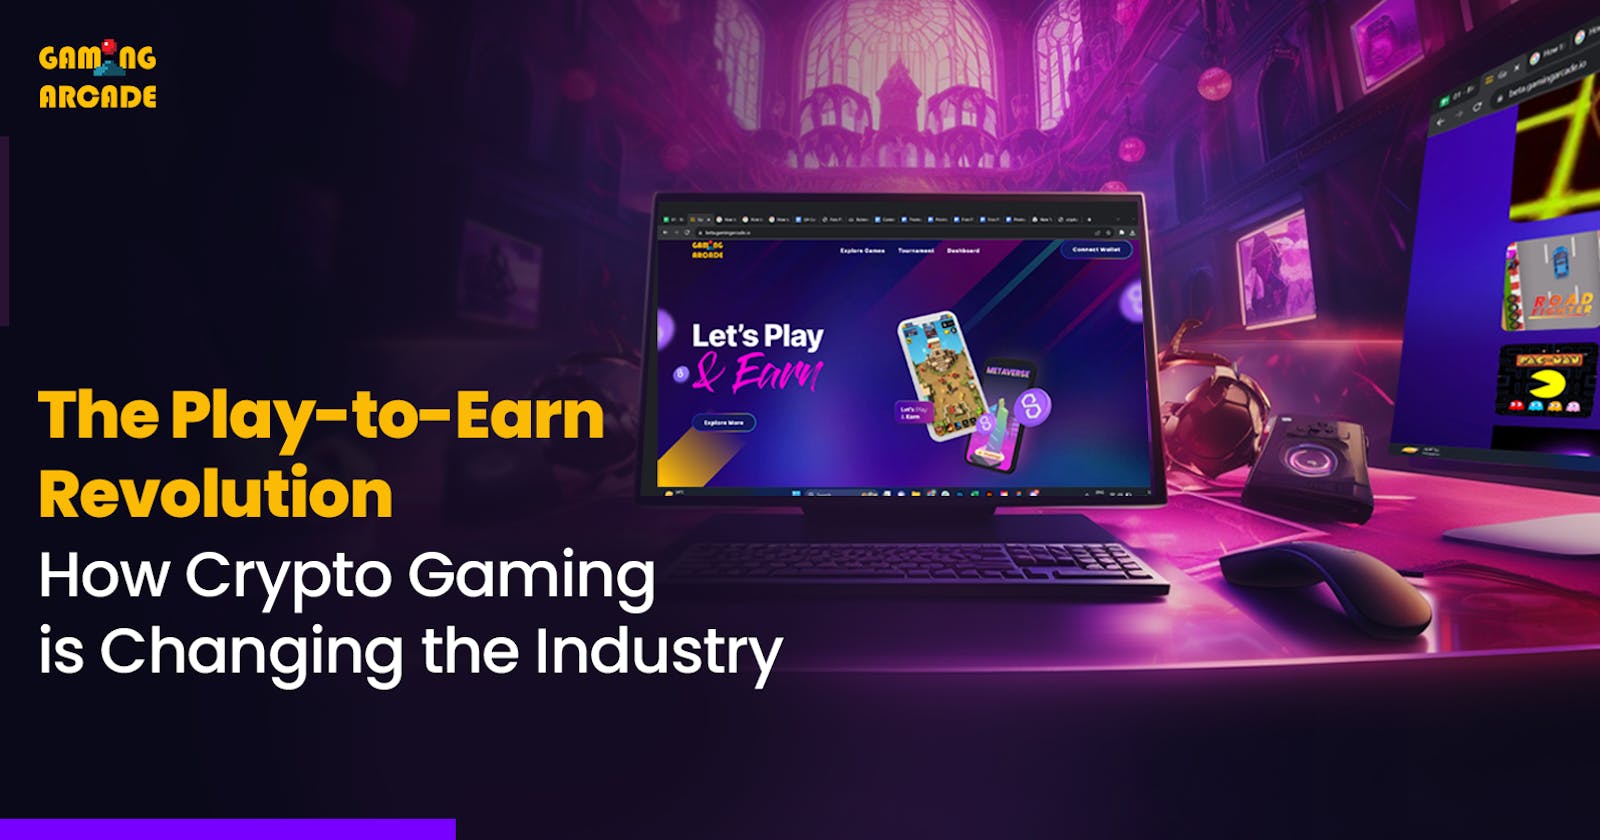 The Play-to-Earn Revolution — How Crypto Gaming is Changing the Industry